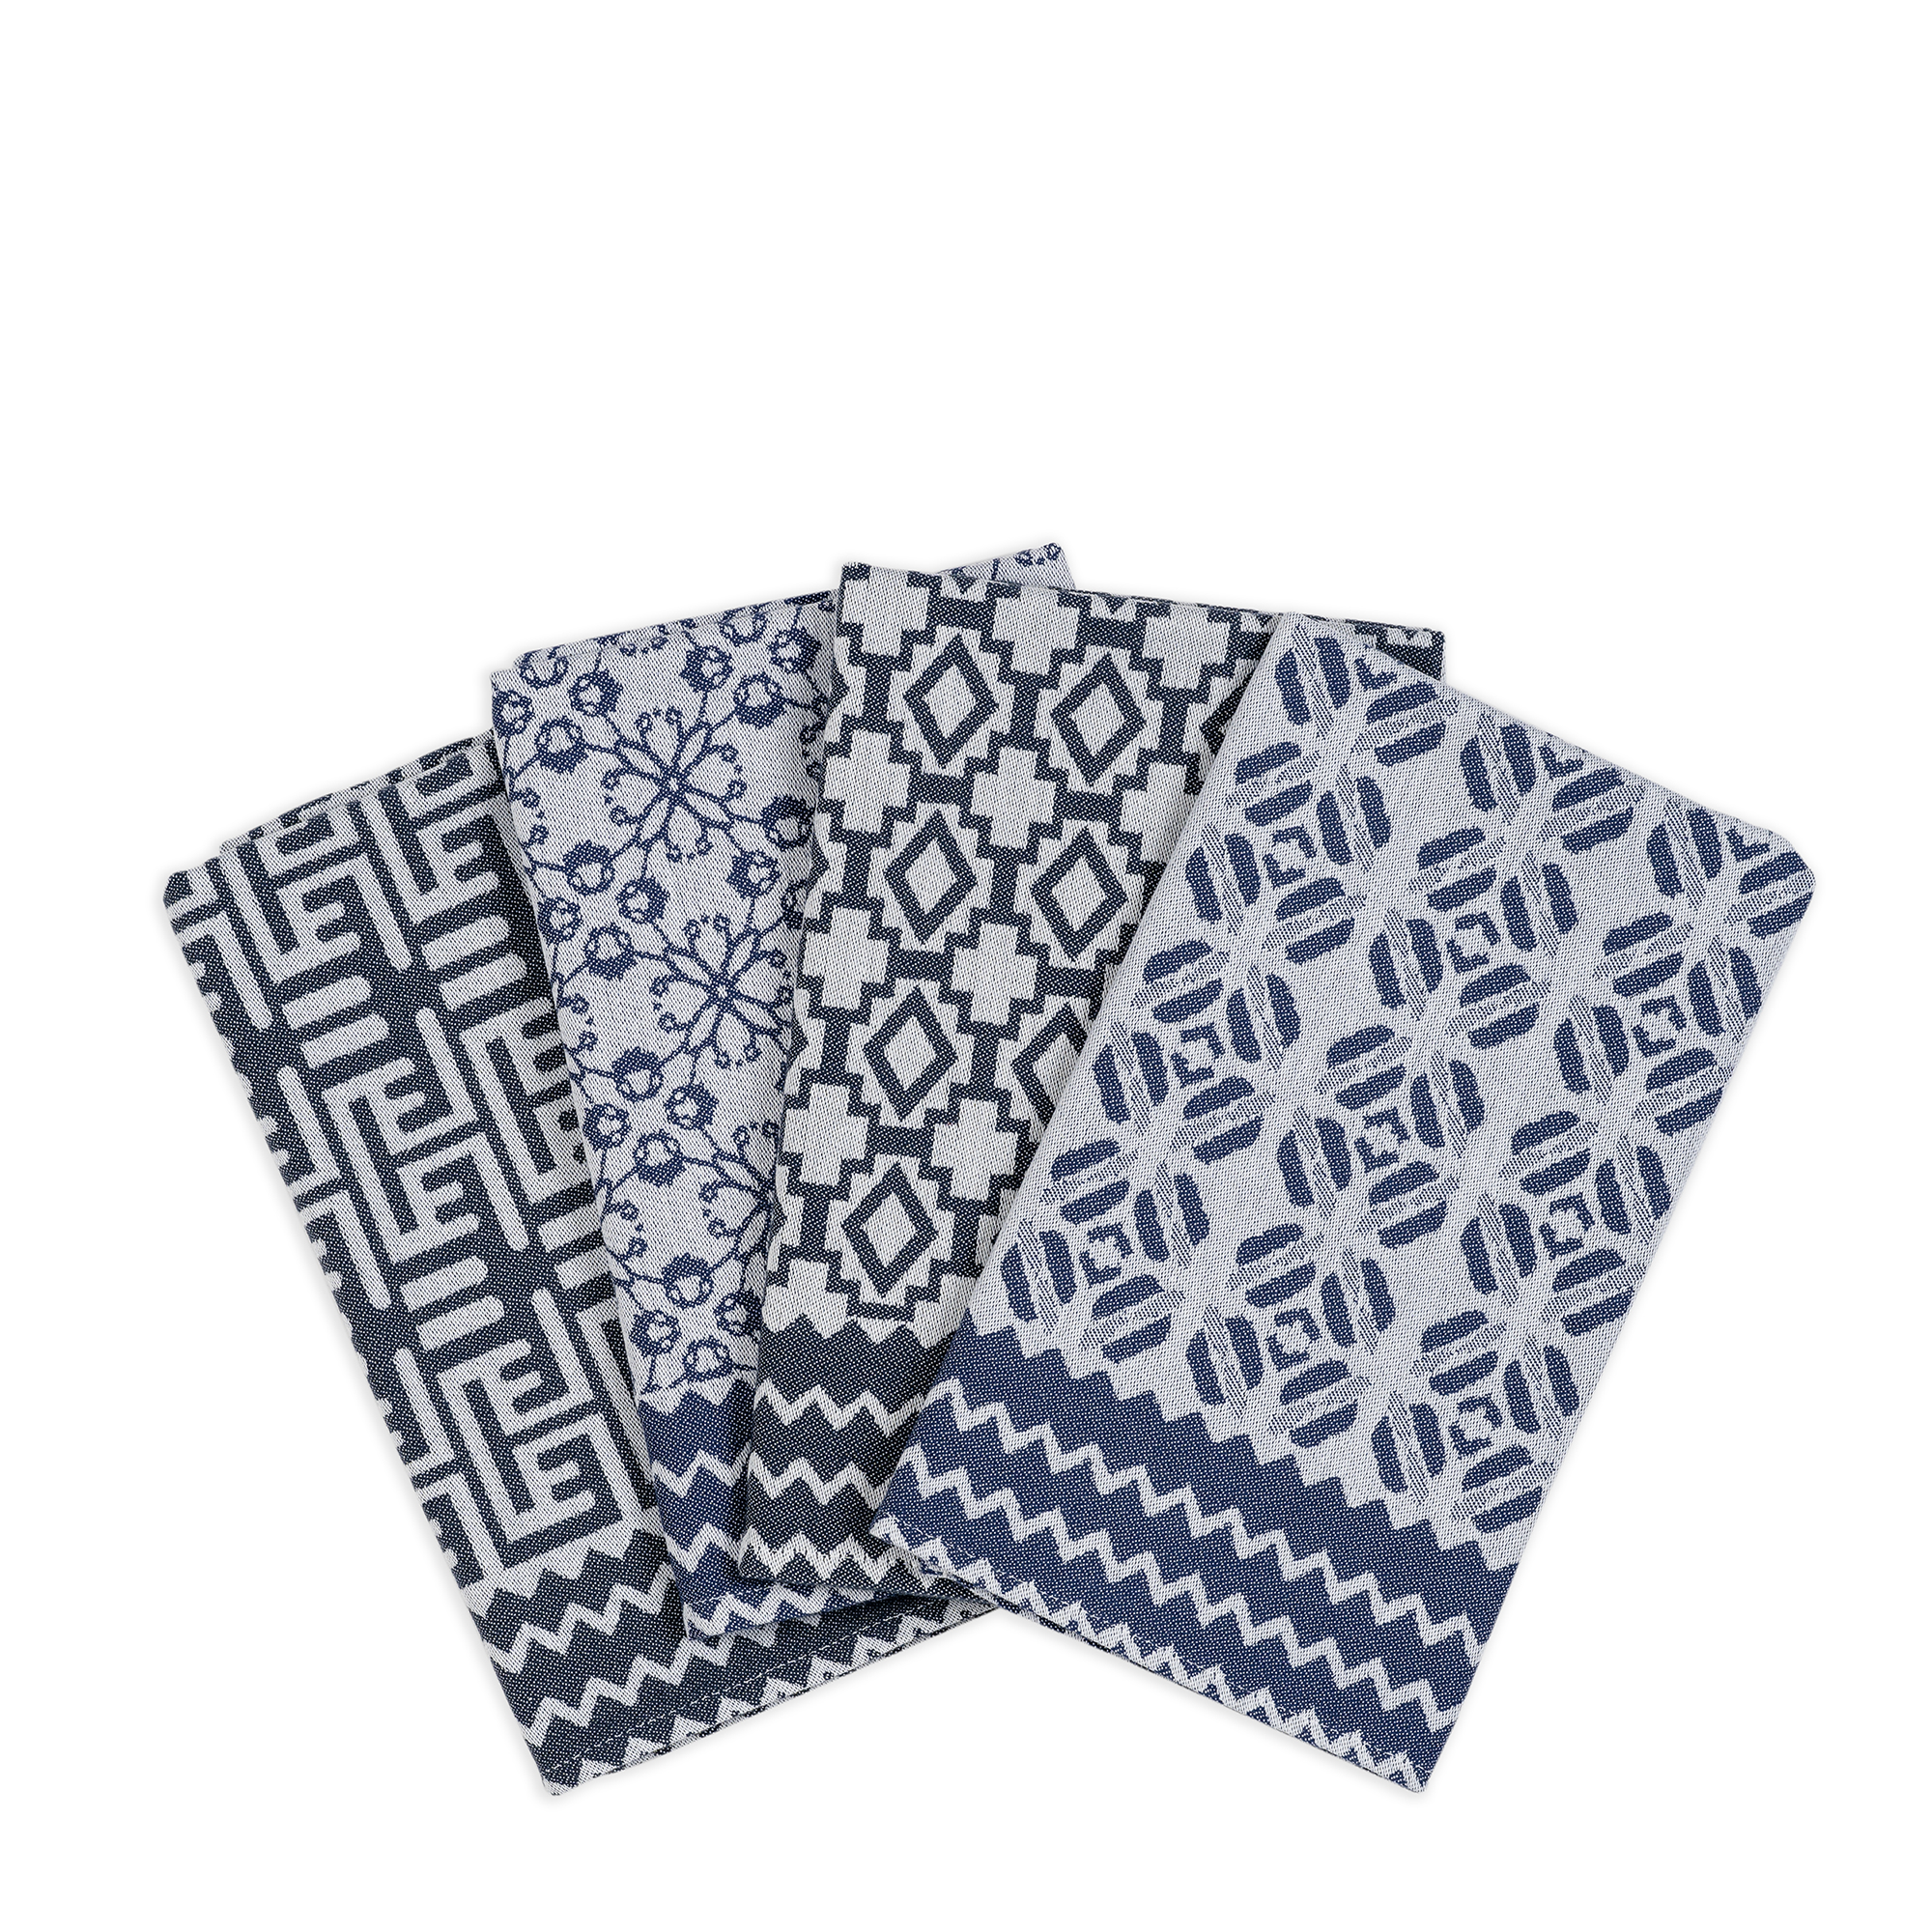 A set of four napkins in lighter and darker blue with a stunning array of African-inspired patterns, woven from 100% African cotton.